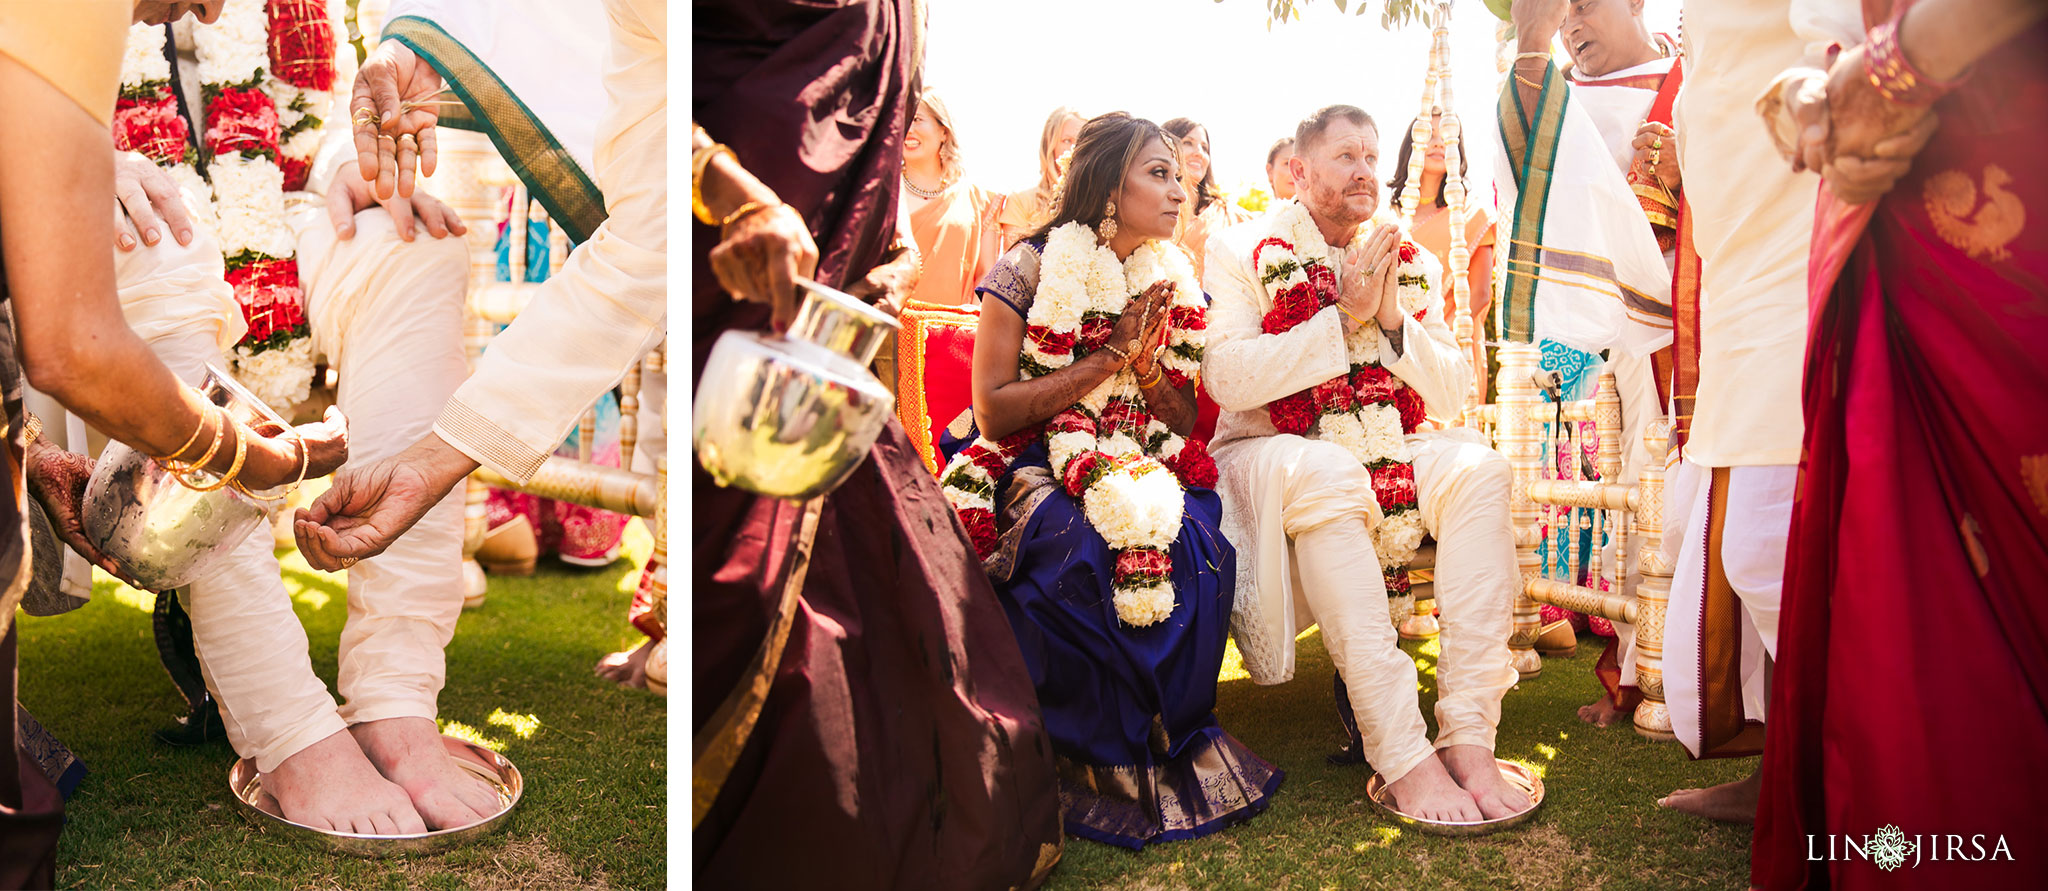 028 sherwood country club indian wedding ceremony photography